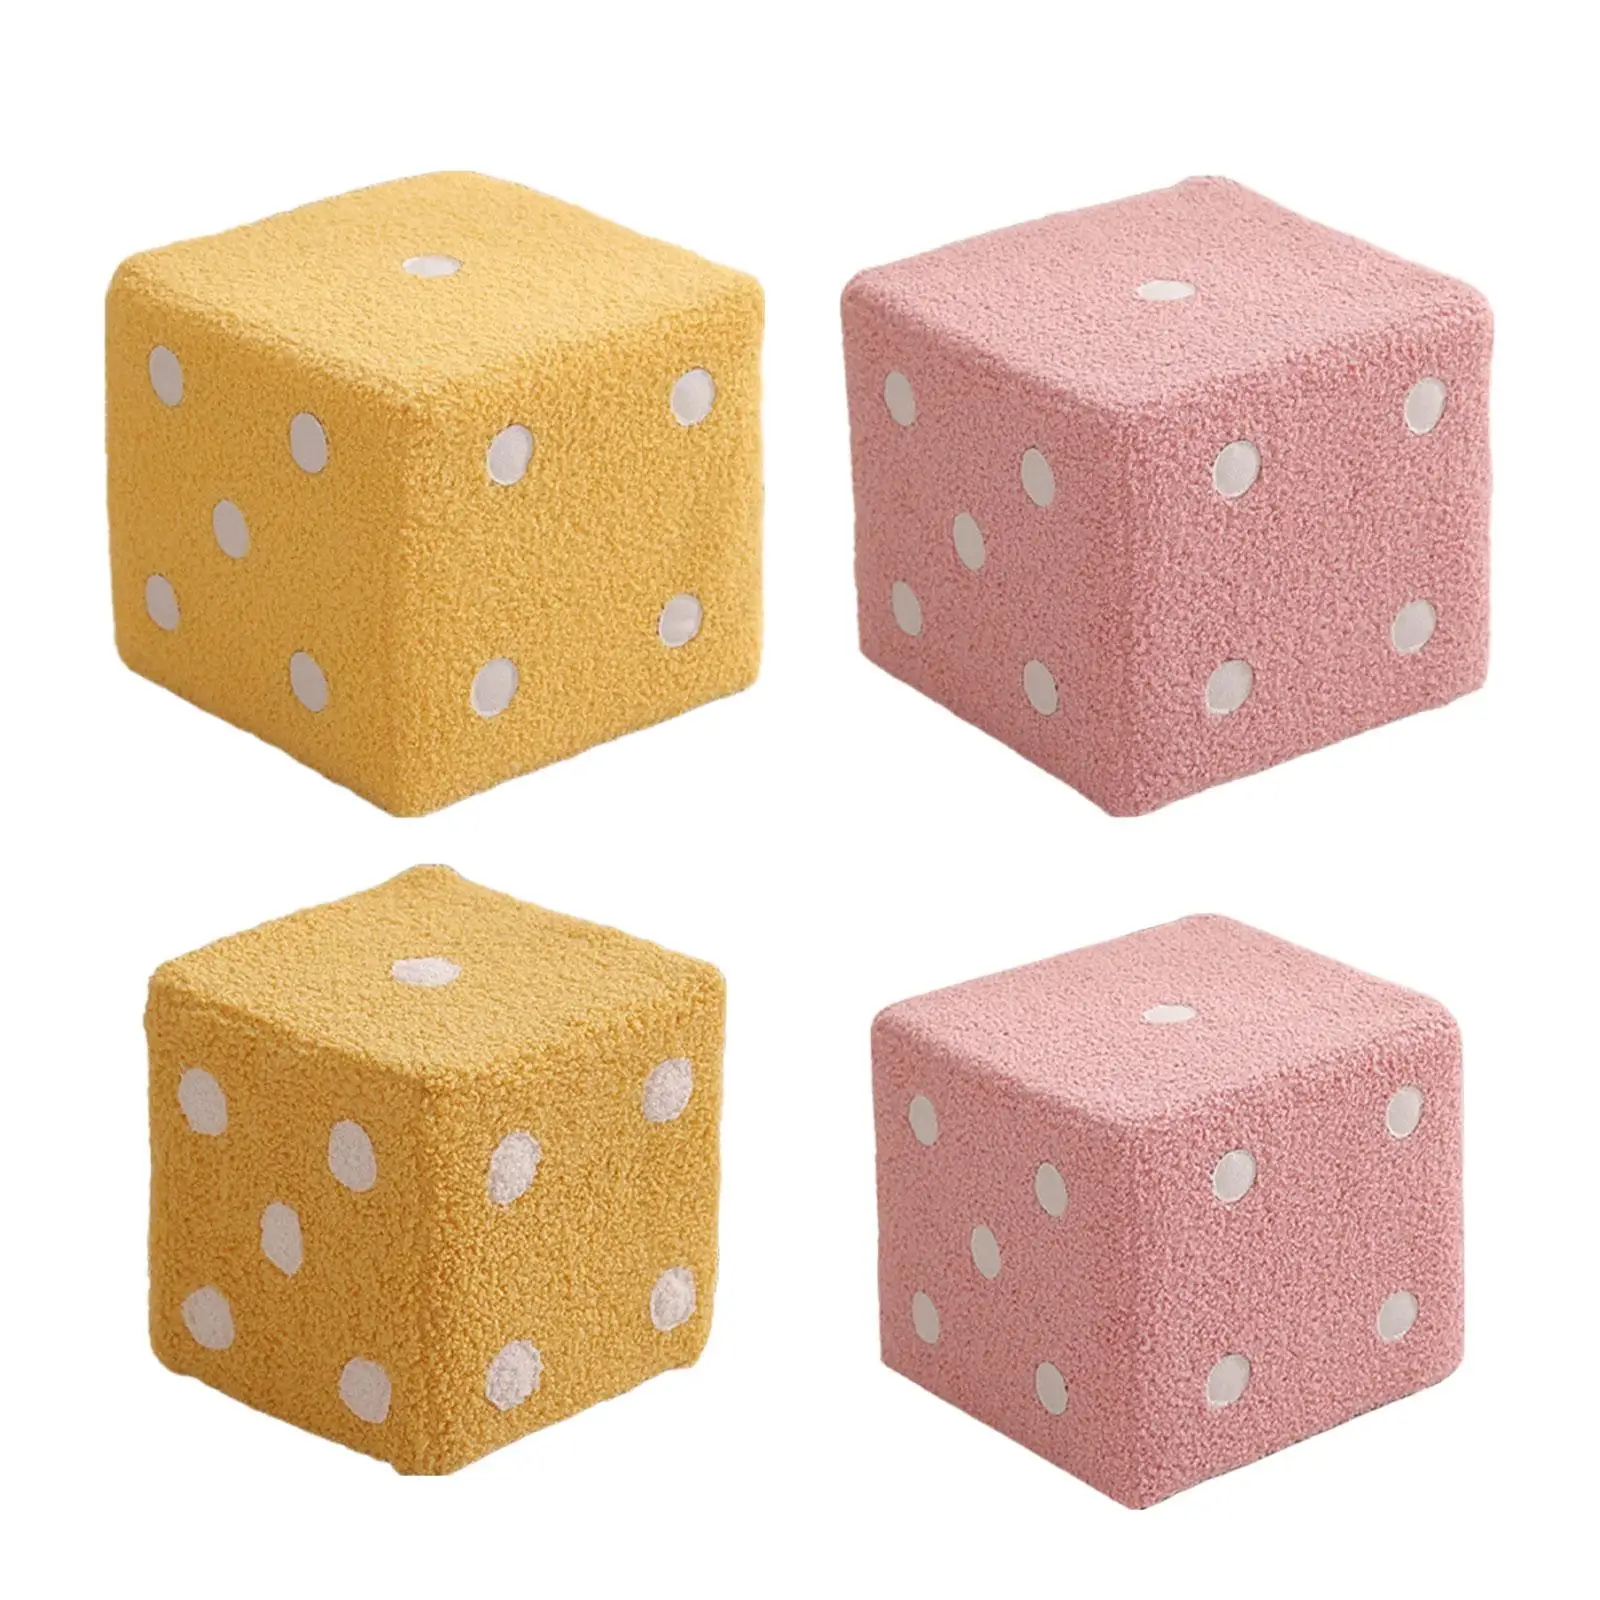 Footstool Stepstool Dice Design Chair Creative Stool Stable Sofa Tea Stool for Living Room Apartment Entryway Bedroom Bedside